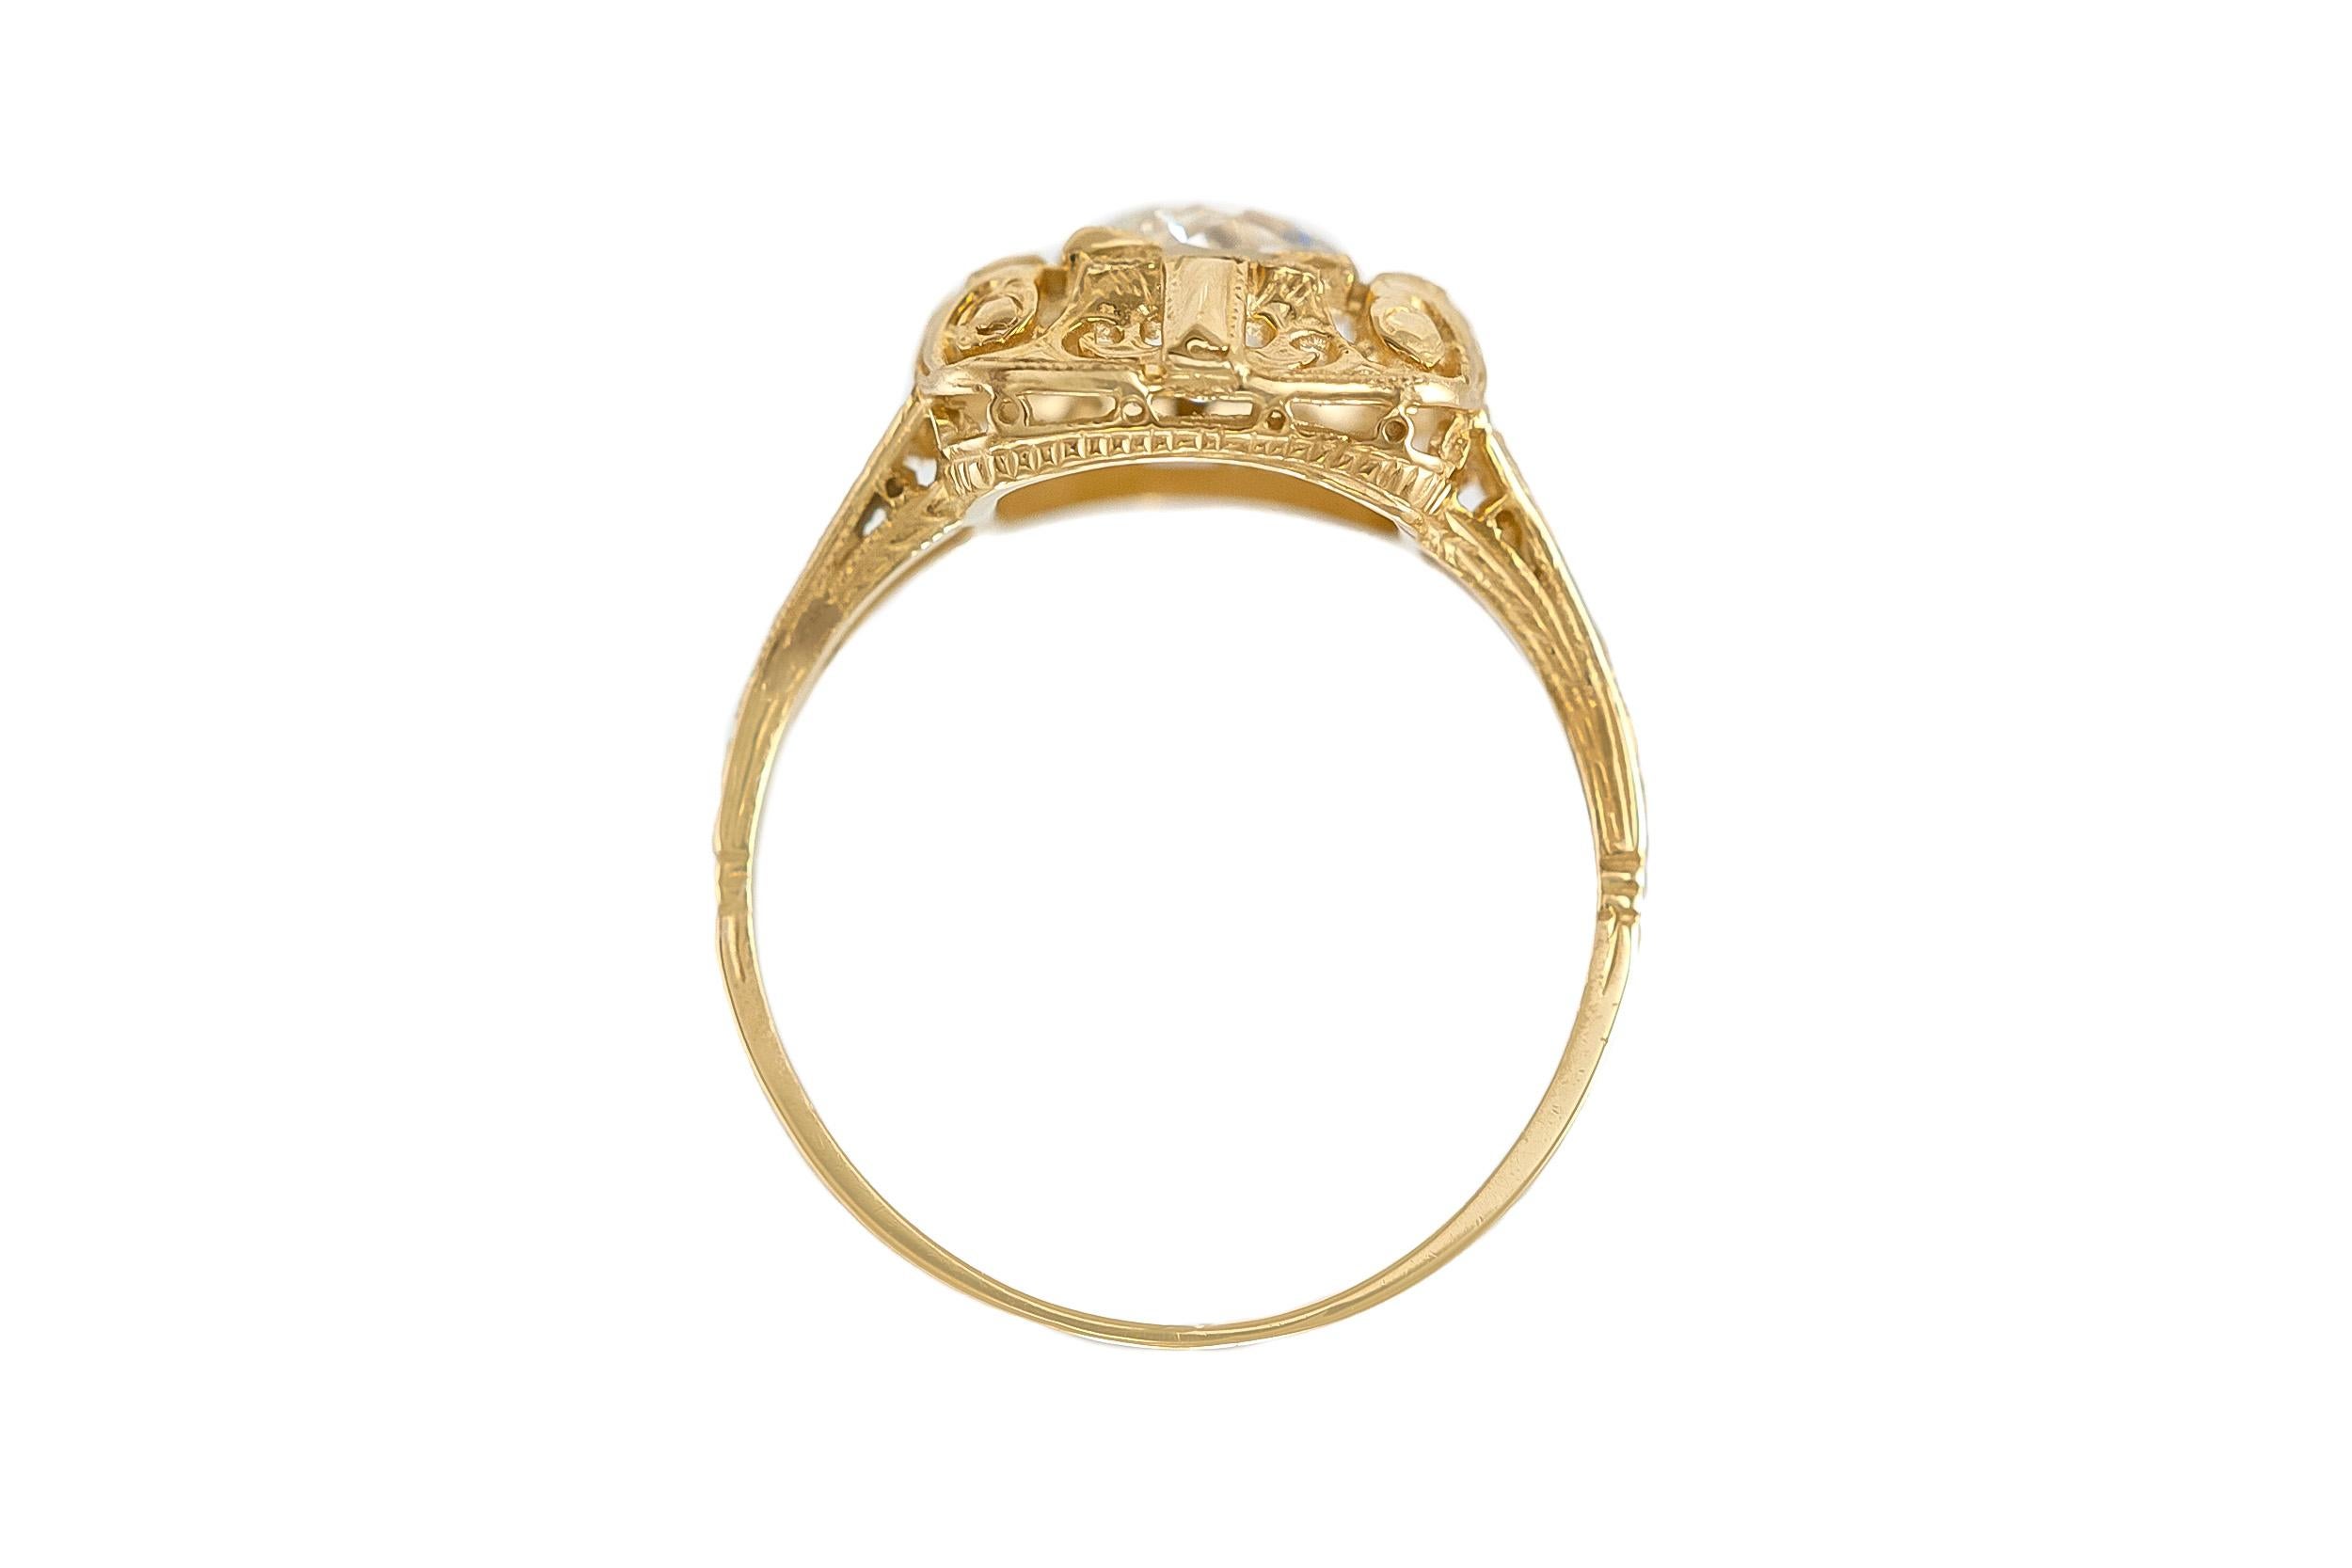 The beautiful ring is finely crafted in 18k yellow gold with center diamonds weighing approximately total of 0.94 carat.
Circa 1930's.
Easy to resize.